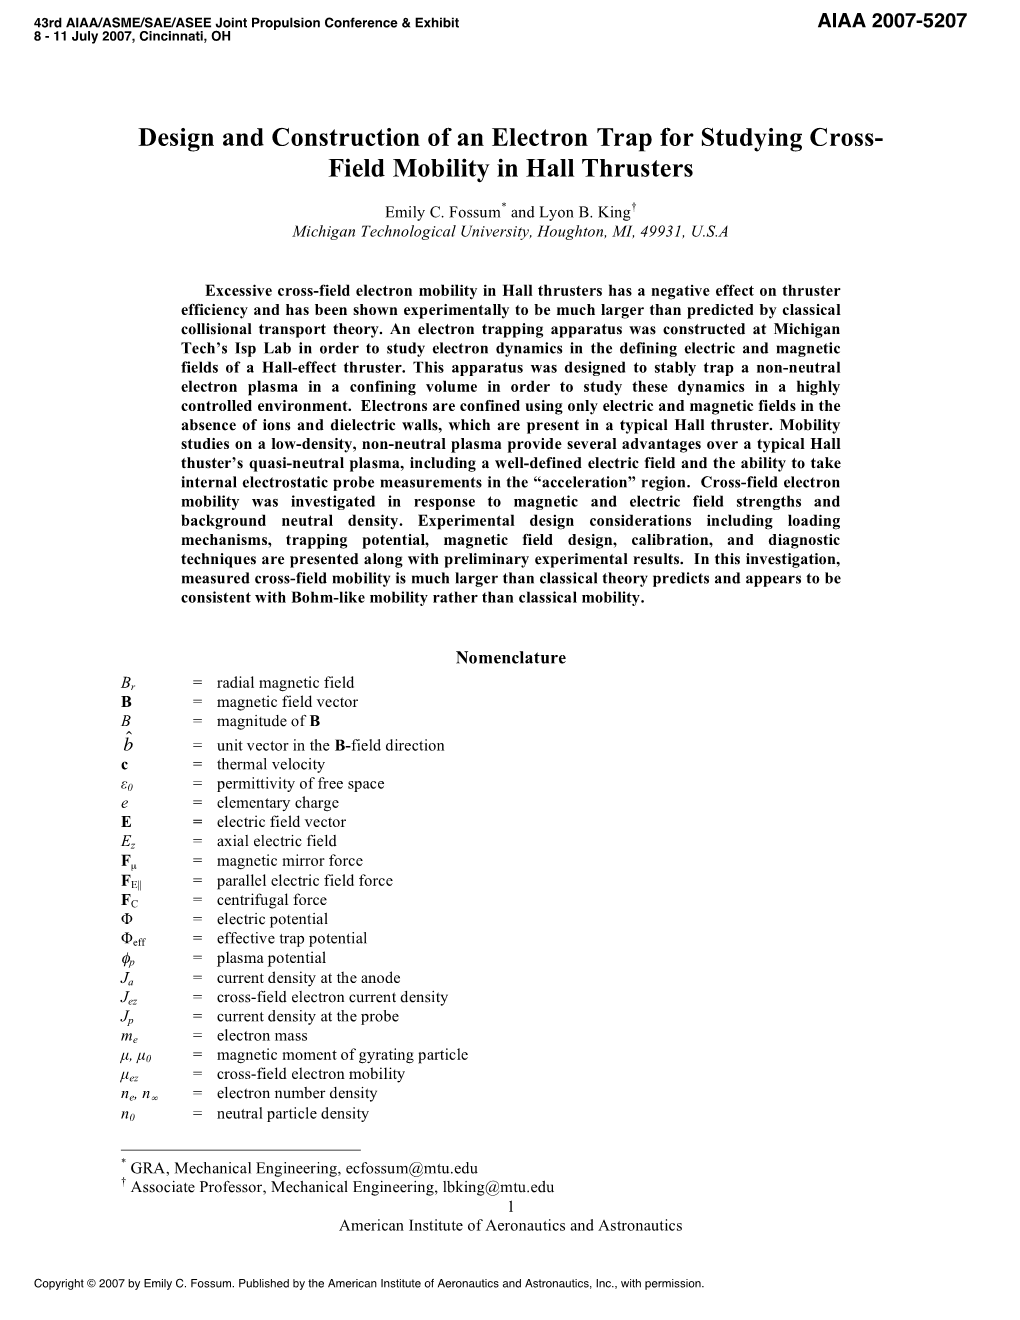 Studies of a Pure Electron Plasma to Investigate Cross Field Mobility in Hall Thrusters